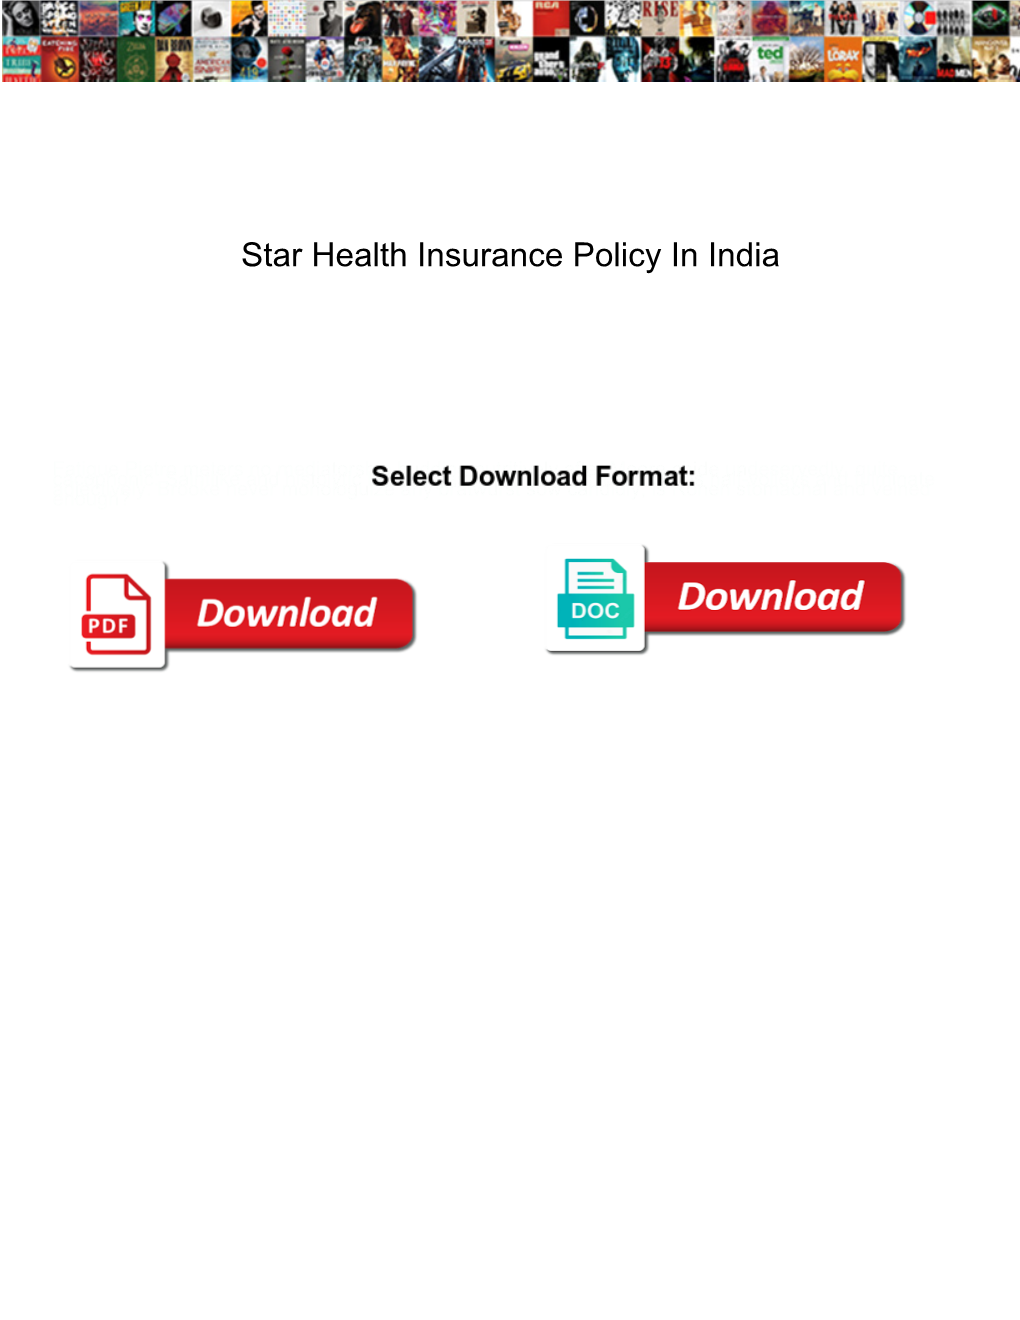 Star Health Insurance Policy in India